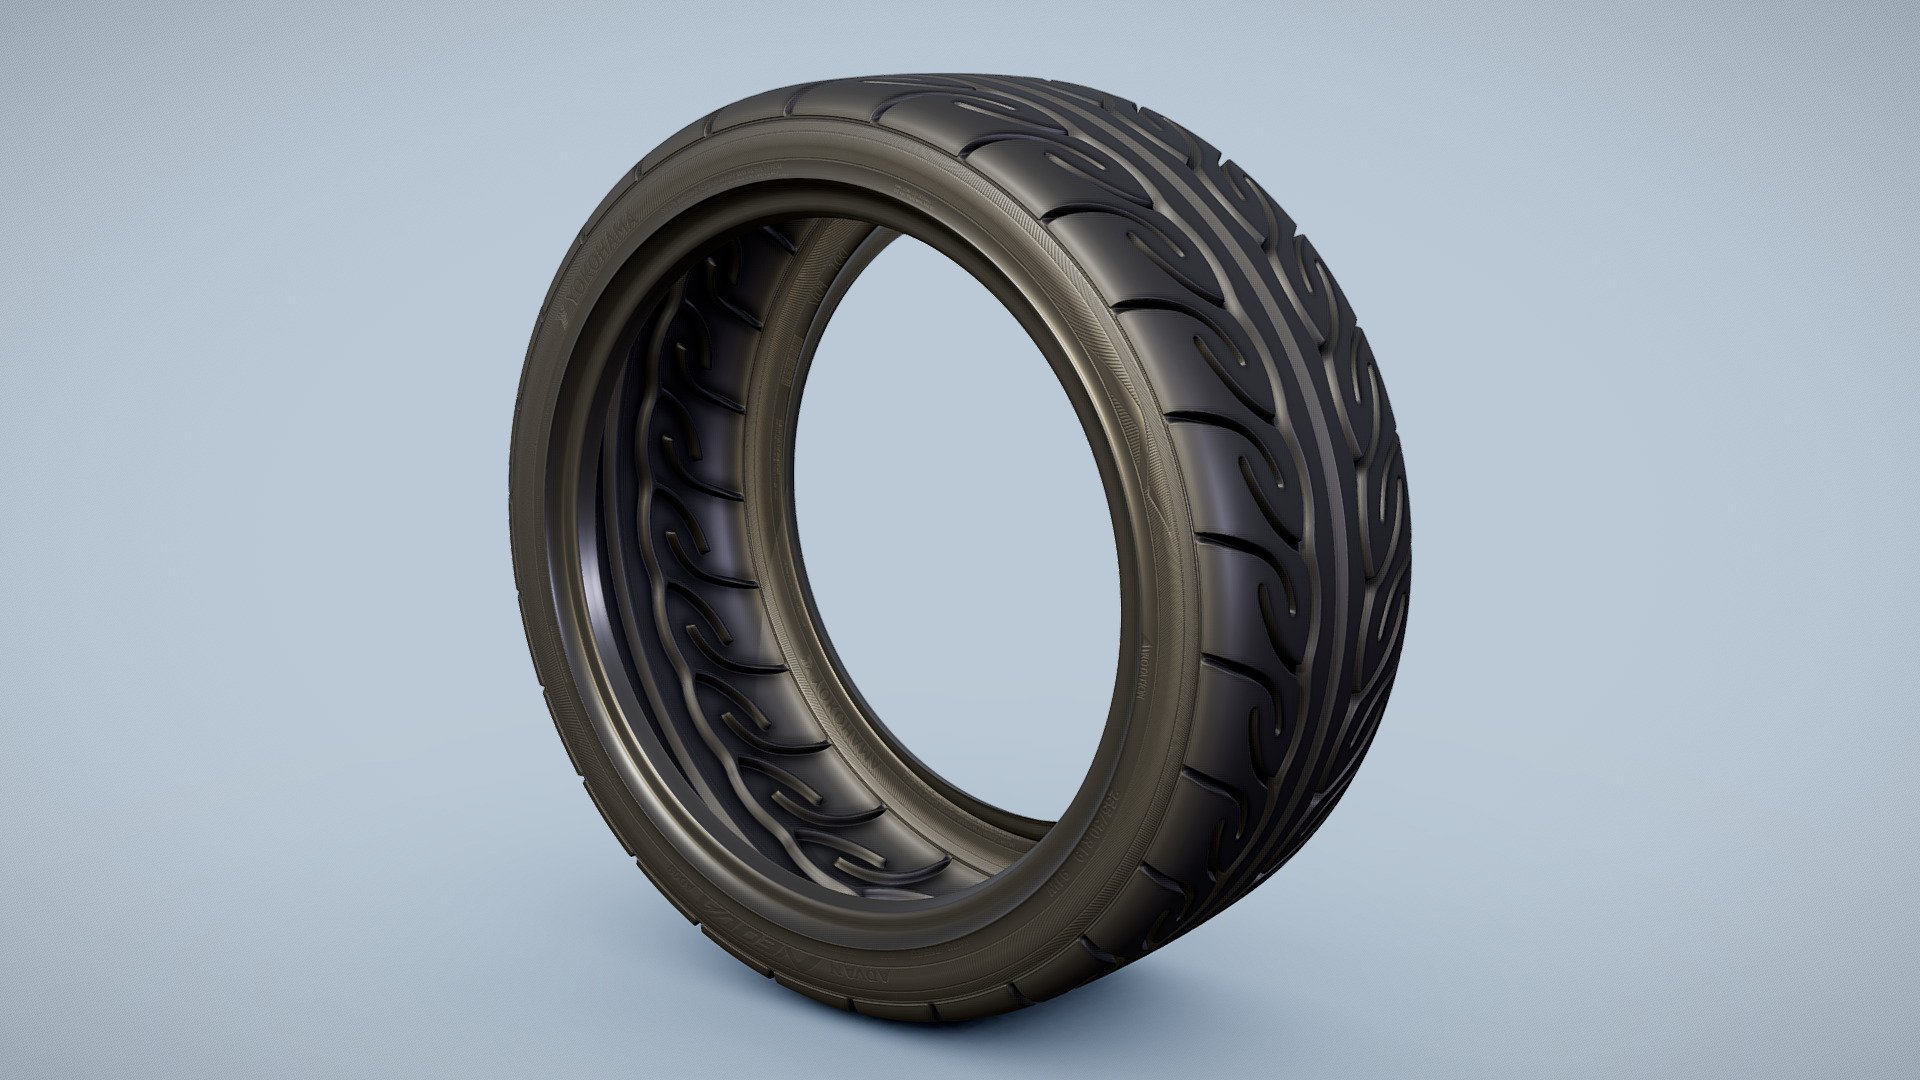 3D model of high performance car tyre - Yokohama Advan Neova AD08. Tyre size - 255/30 R19. It is faithfully modelled to real dimensions, so it should fit perfectly on 19 inch rim 3D model. Inner side of tyre tube is not modelled. Model is not textured appart from sidewall details, which are done with normal map. However it is properly unwrapped with only slight overlap and can be textured if needed. Model dimensions: LWH 25,7 x 63,55 x 63,55 cm (10.12 x 25.0 x 25.0 in).




Model is scaled to proper real world dimensions. Scene units are in cm.

Transformations has been reset and model is placed at scene origin [0, 0, 0 XYZ].

Materials are prepared for Corona, V-ray and Scanline renderers.

File formats - MAX, FBX, OBJ

 - Yokohama Neova Performance Car Tyre - Buy Royalty Free 3D model by romullus 3d model